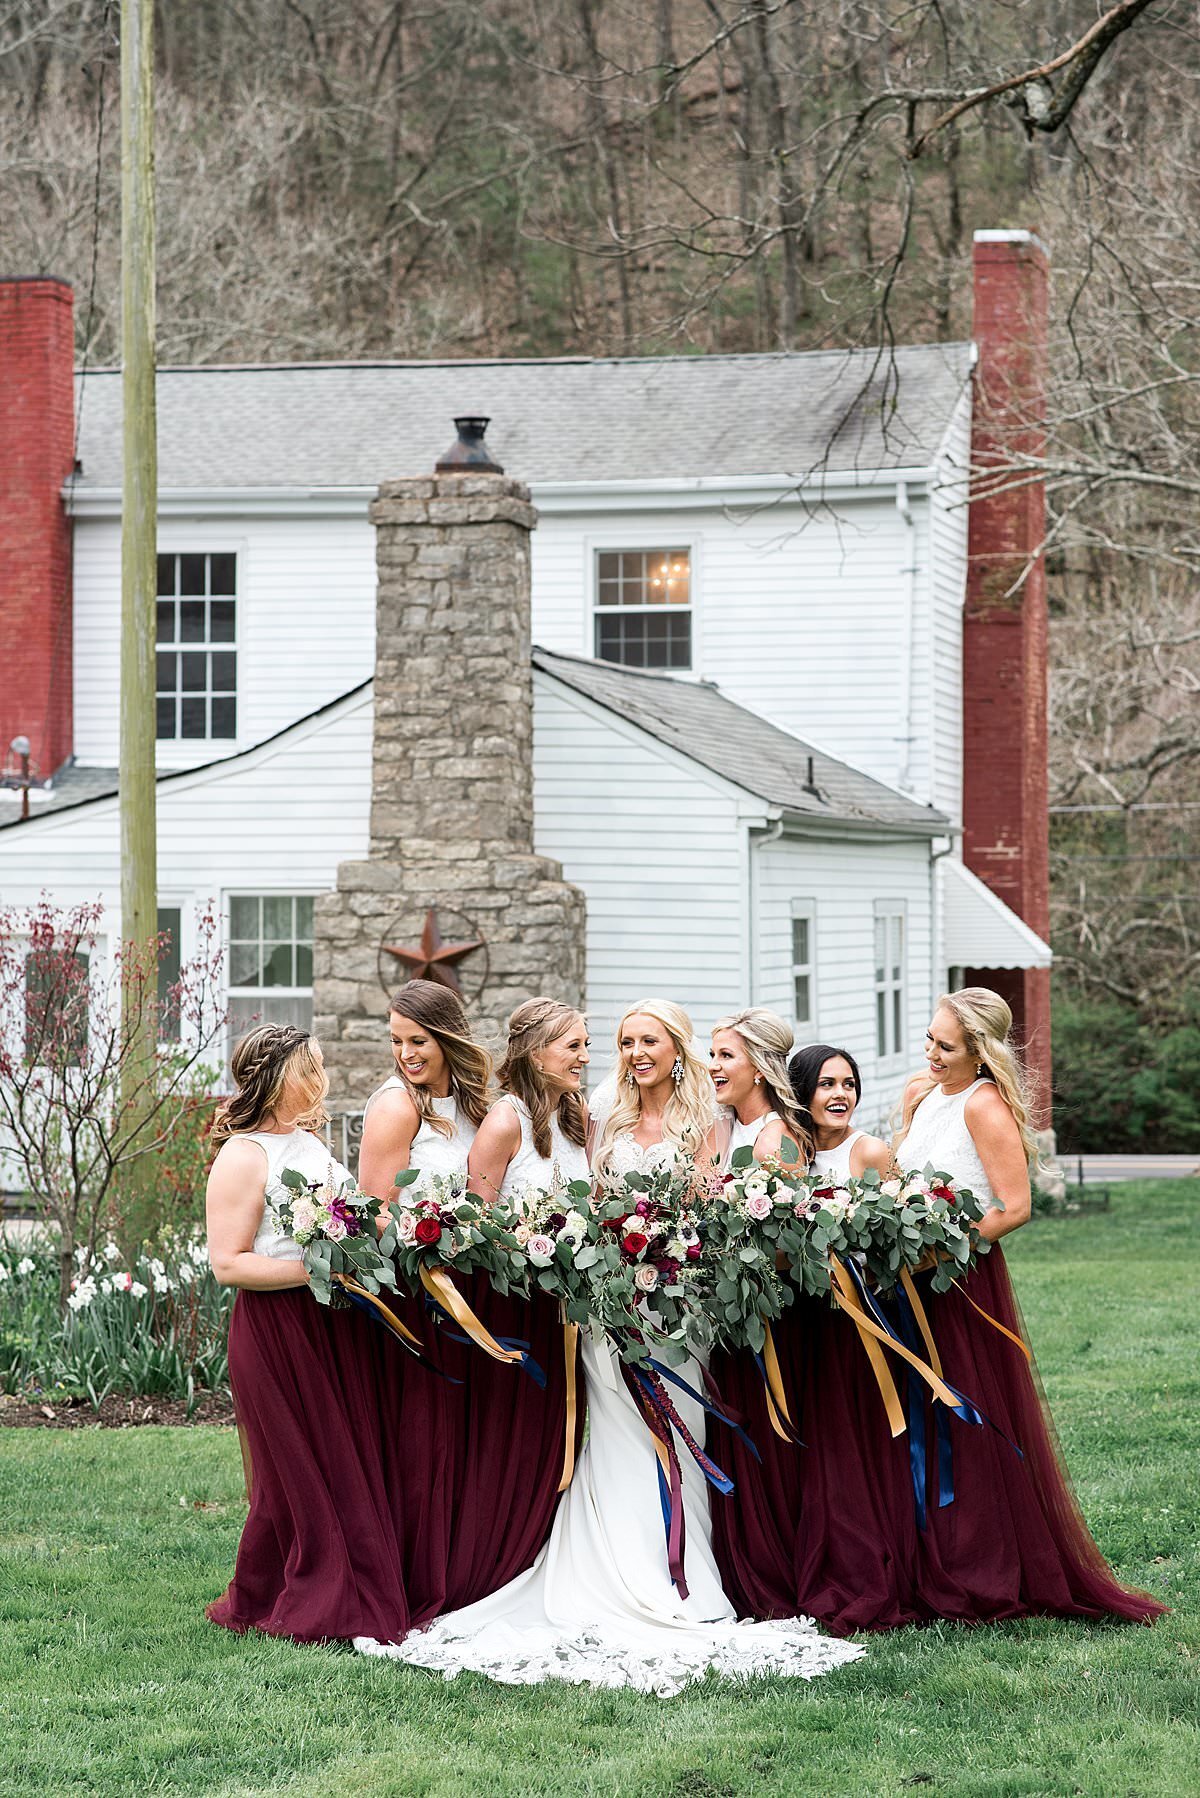 Bride grouped with bridesmaids who are wearing burgundy tulle skirts with white lace tops by historic home at Drakewood Farms